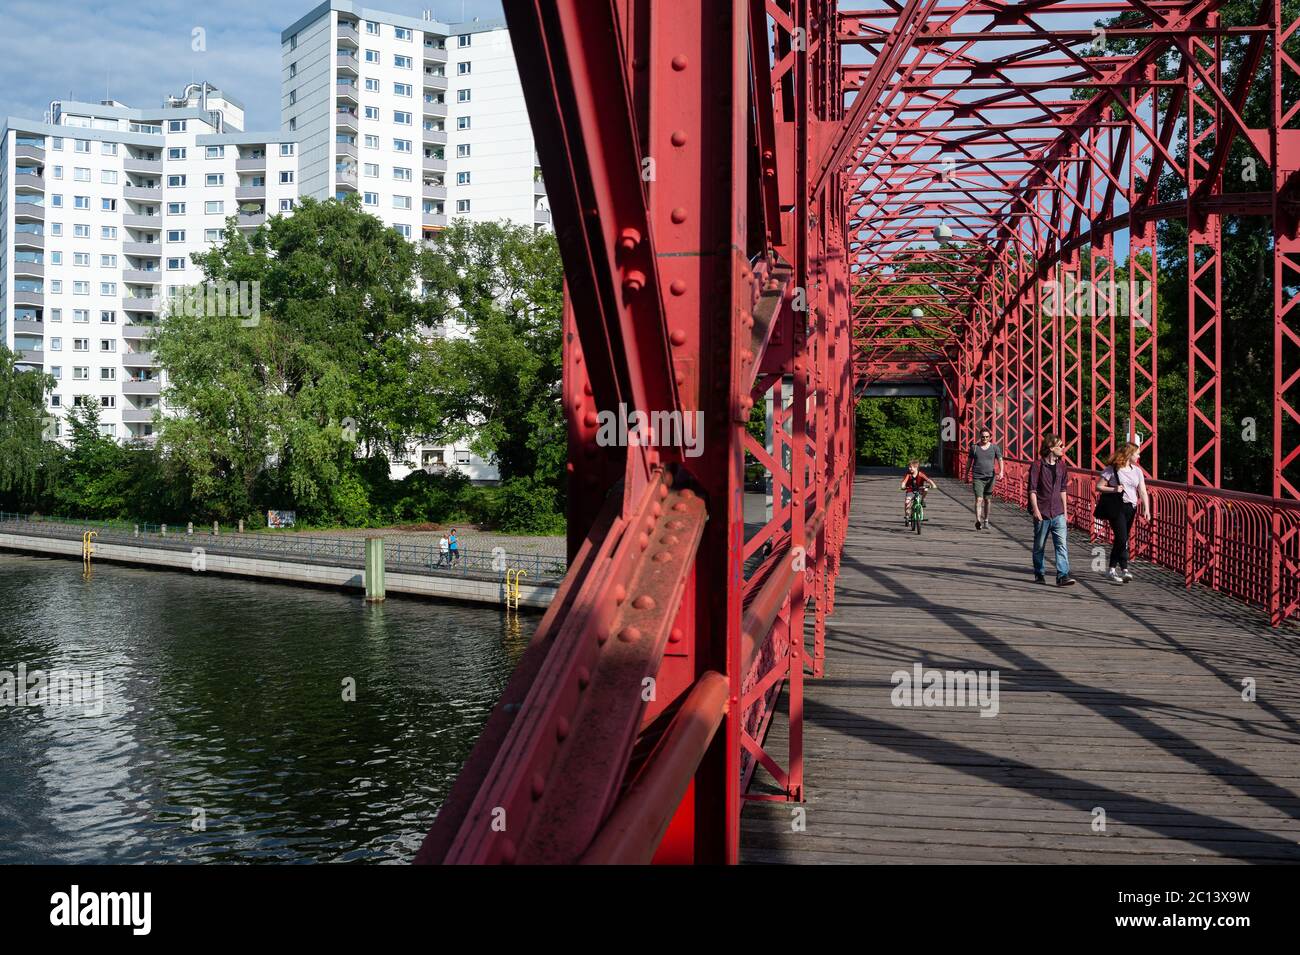 13.06.2019, Berlin, Germany, Europe - The Tegeler Hafenbruecke Bridge (Sechserbruecke) connects both banks at the Tegel canal and Tegel port. Stock Photo